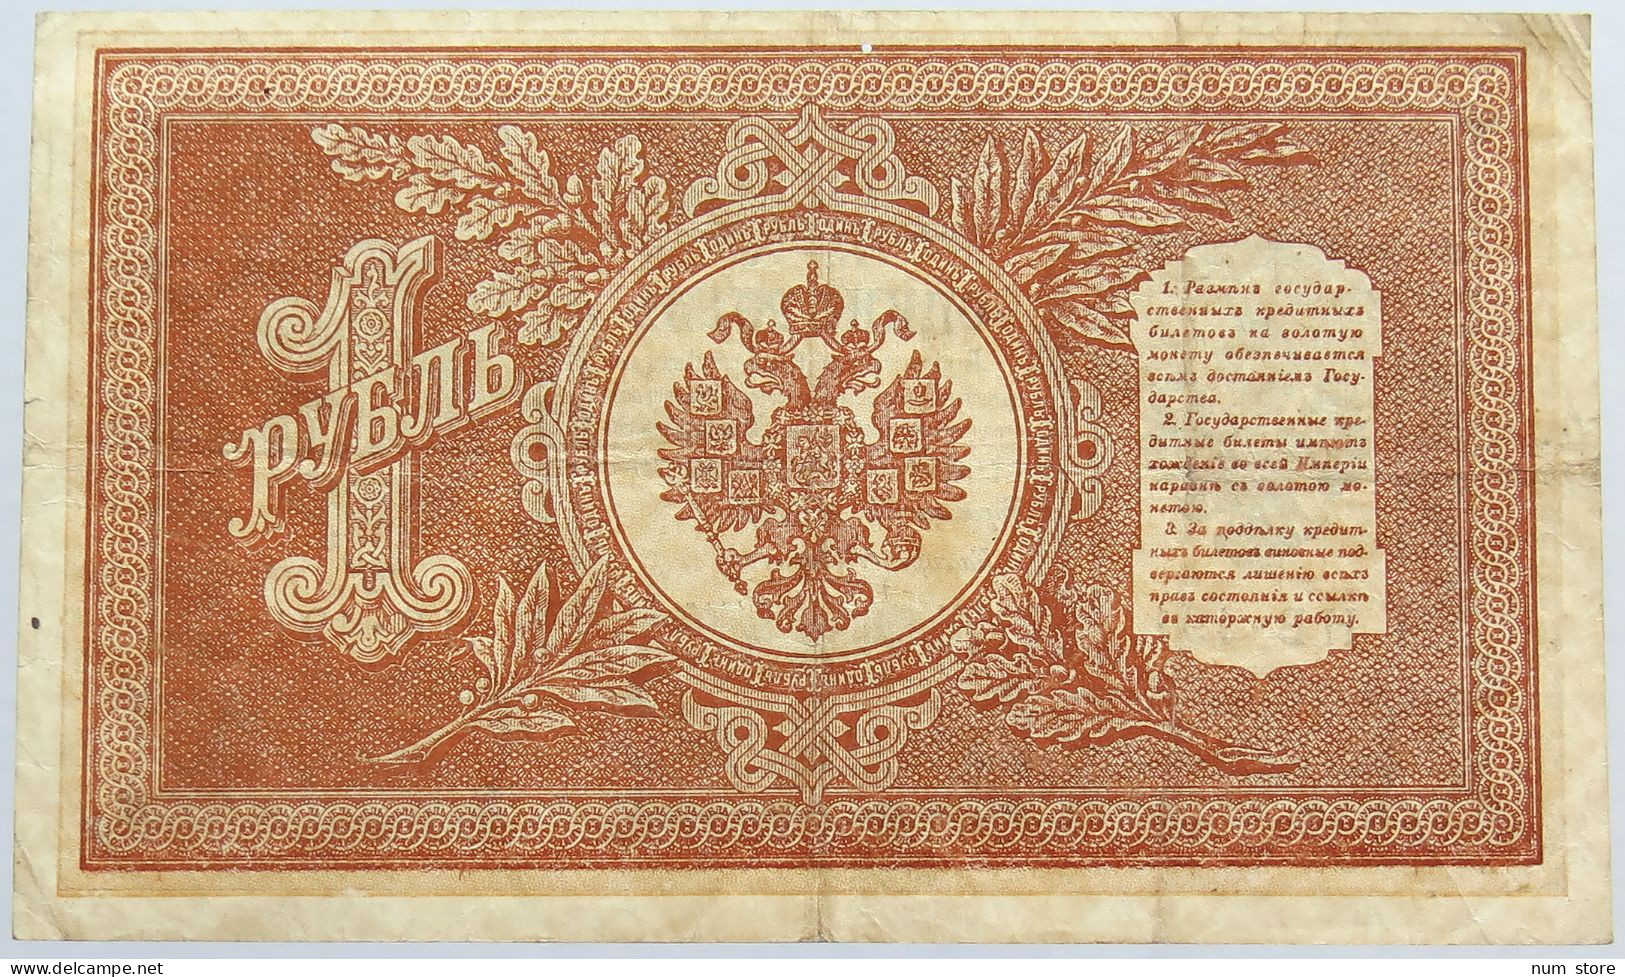 RUSSIA 1 ROUBLE 1898 #alb003 0639 - Russie